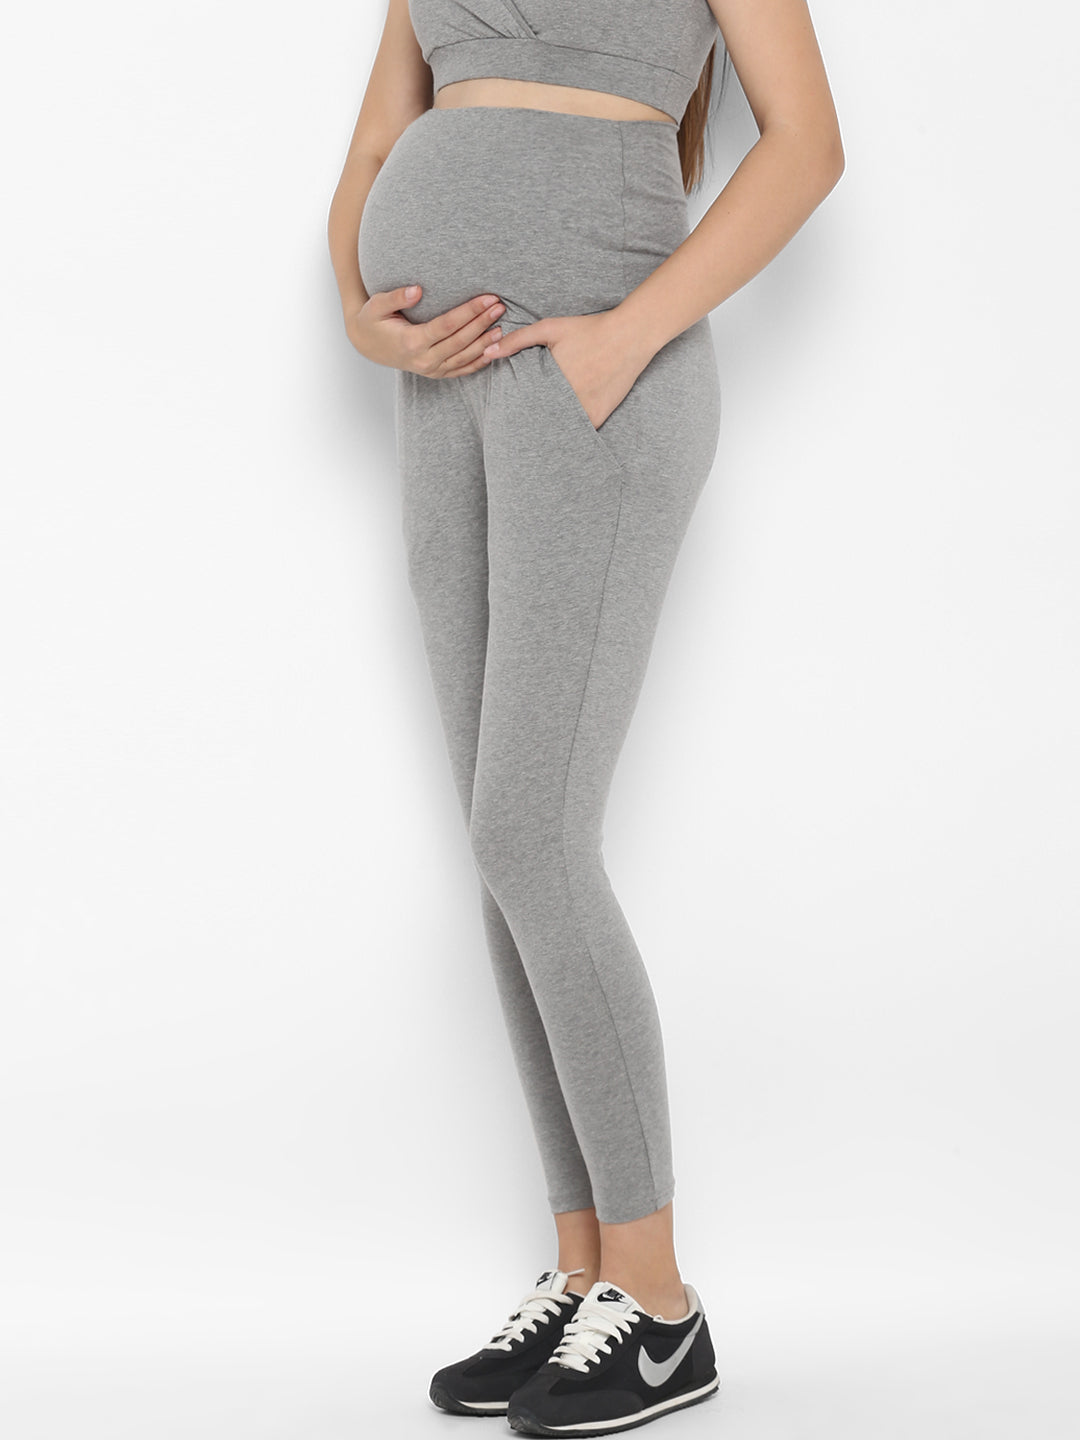 Maternity Bottoms (with Pockets!) – After9